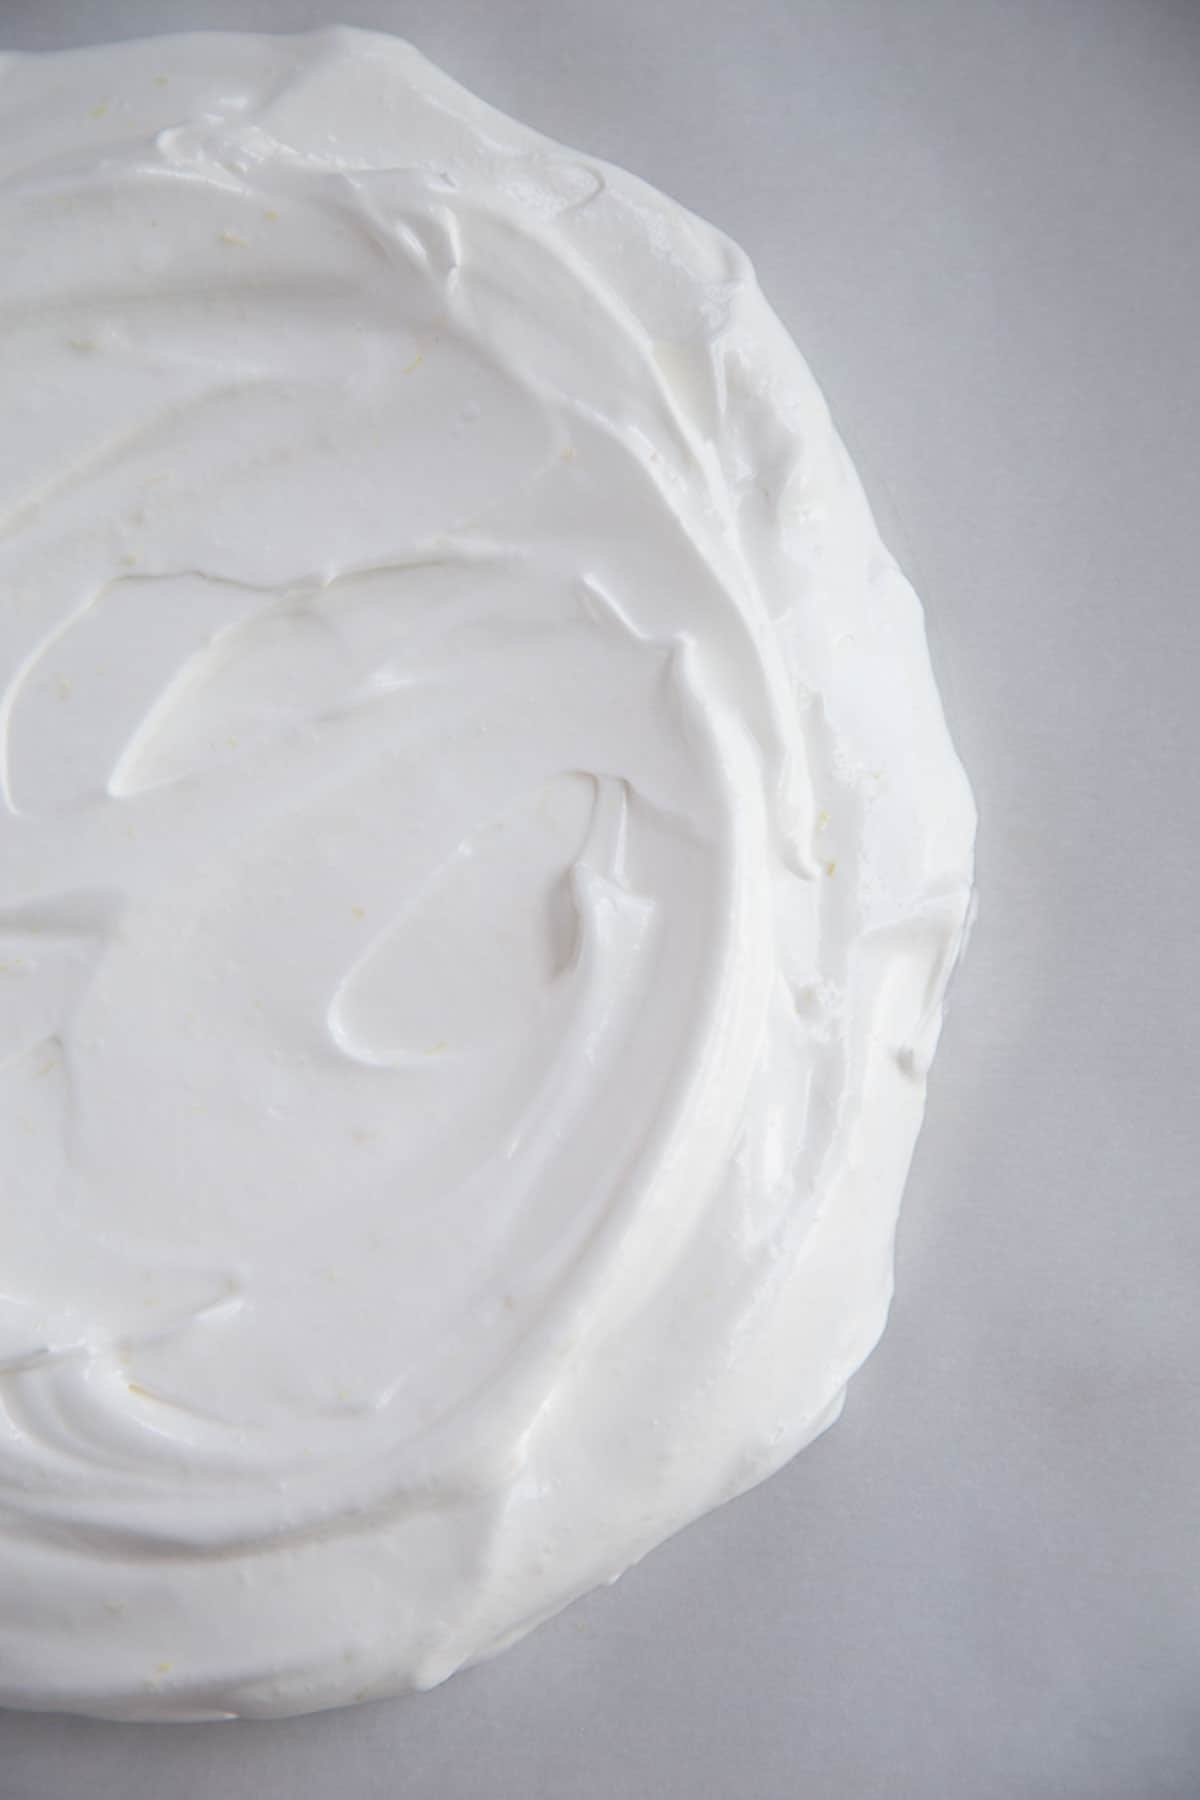 whipped egg whites in a circular shape on a piece of parchment paper.